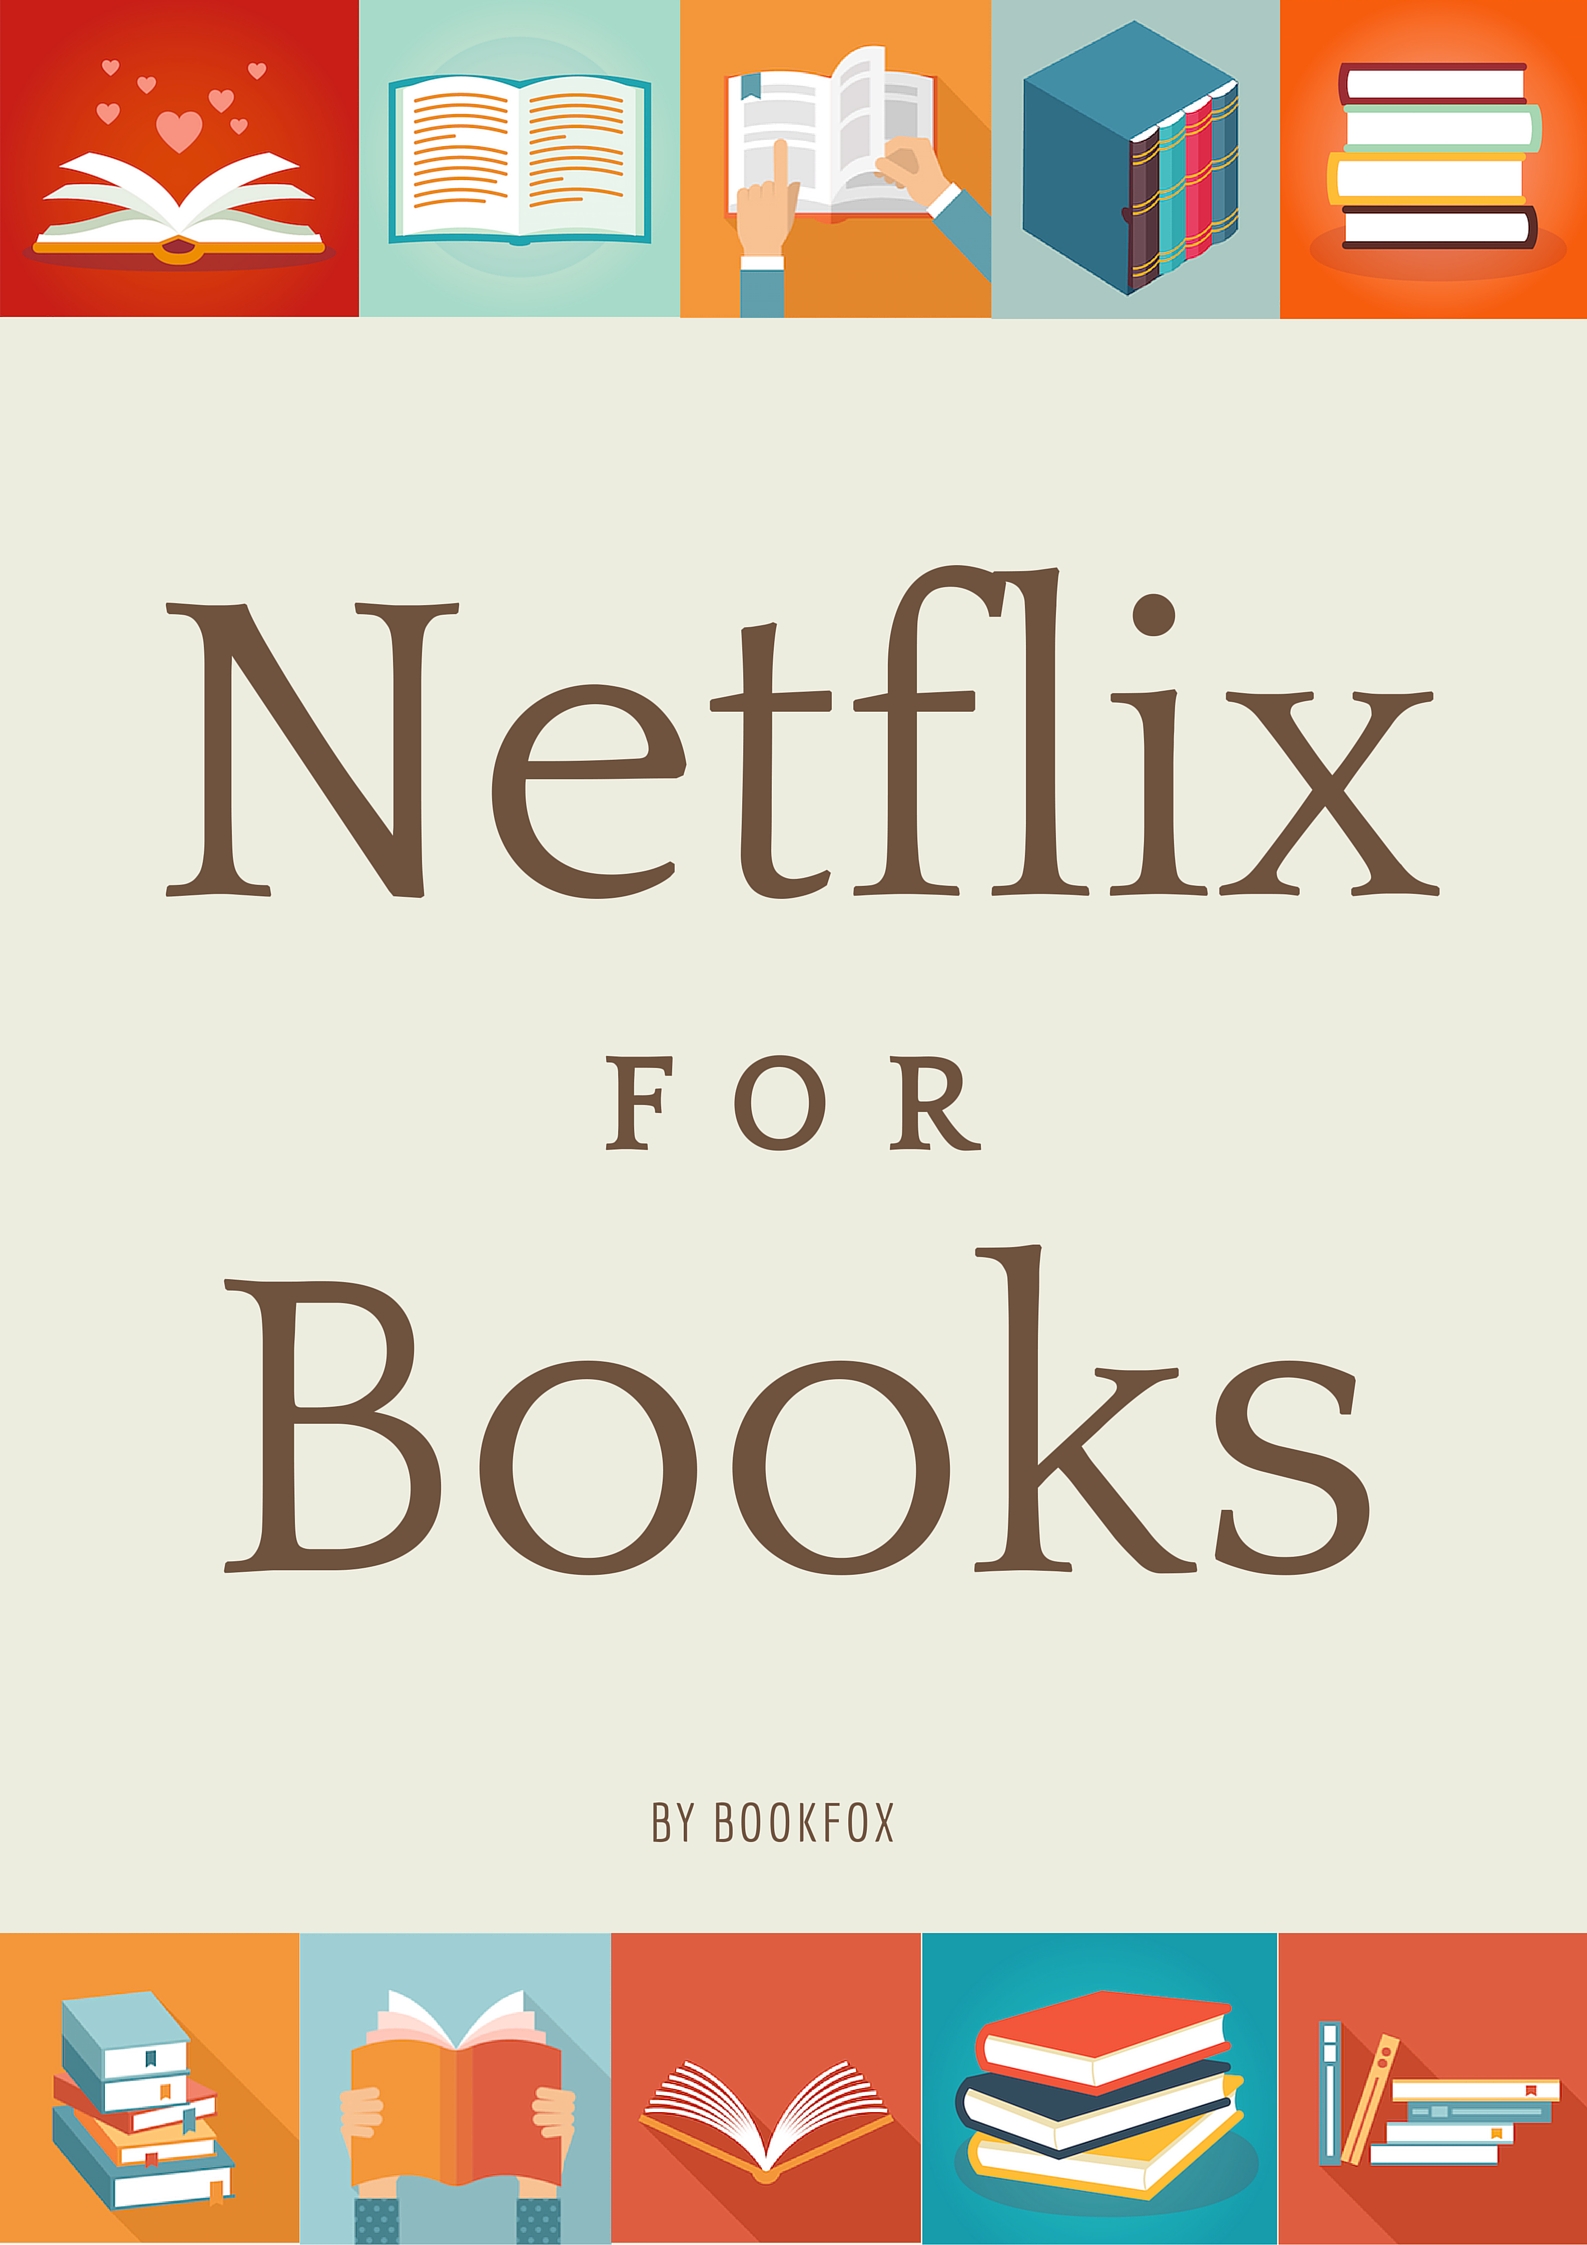 Reviews of the Best "Netflix for Books" - Bookfox